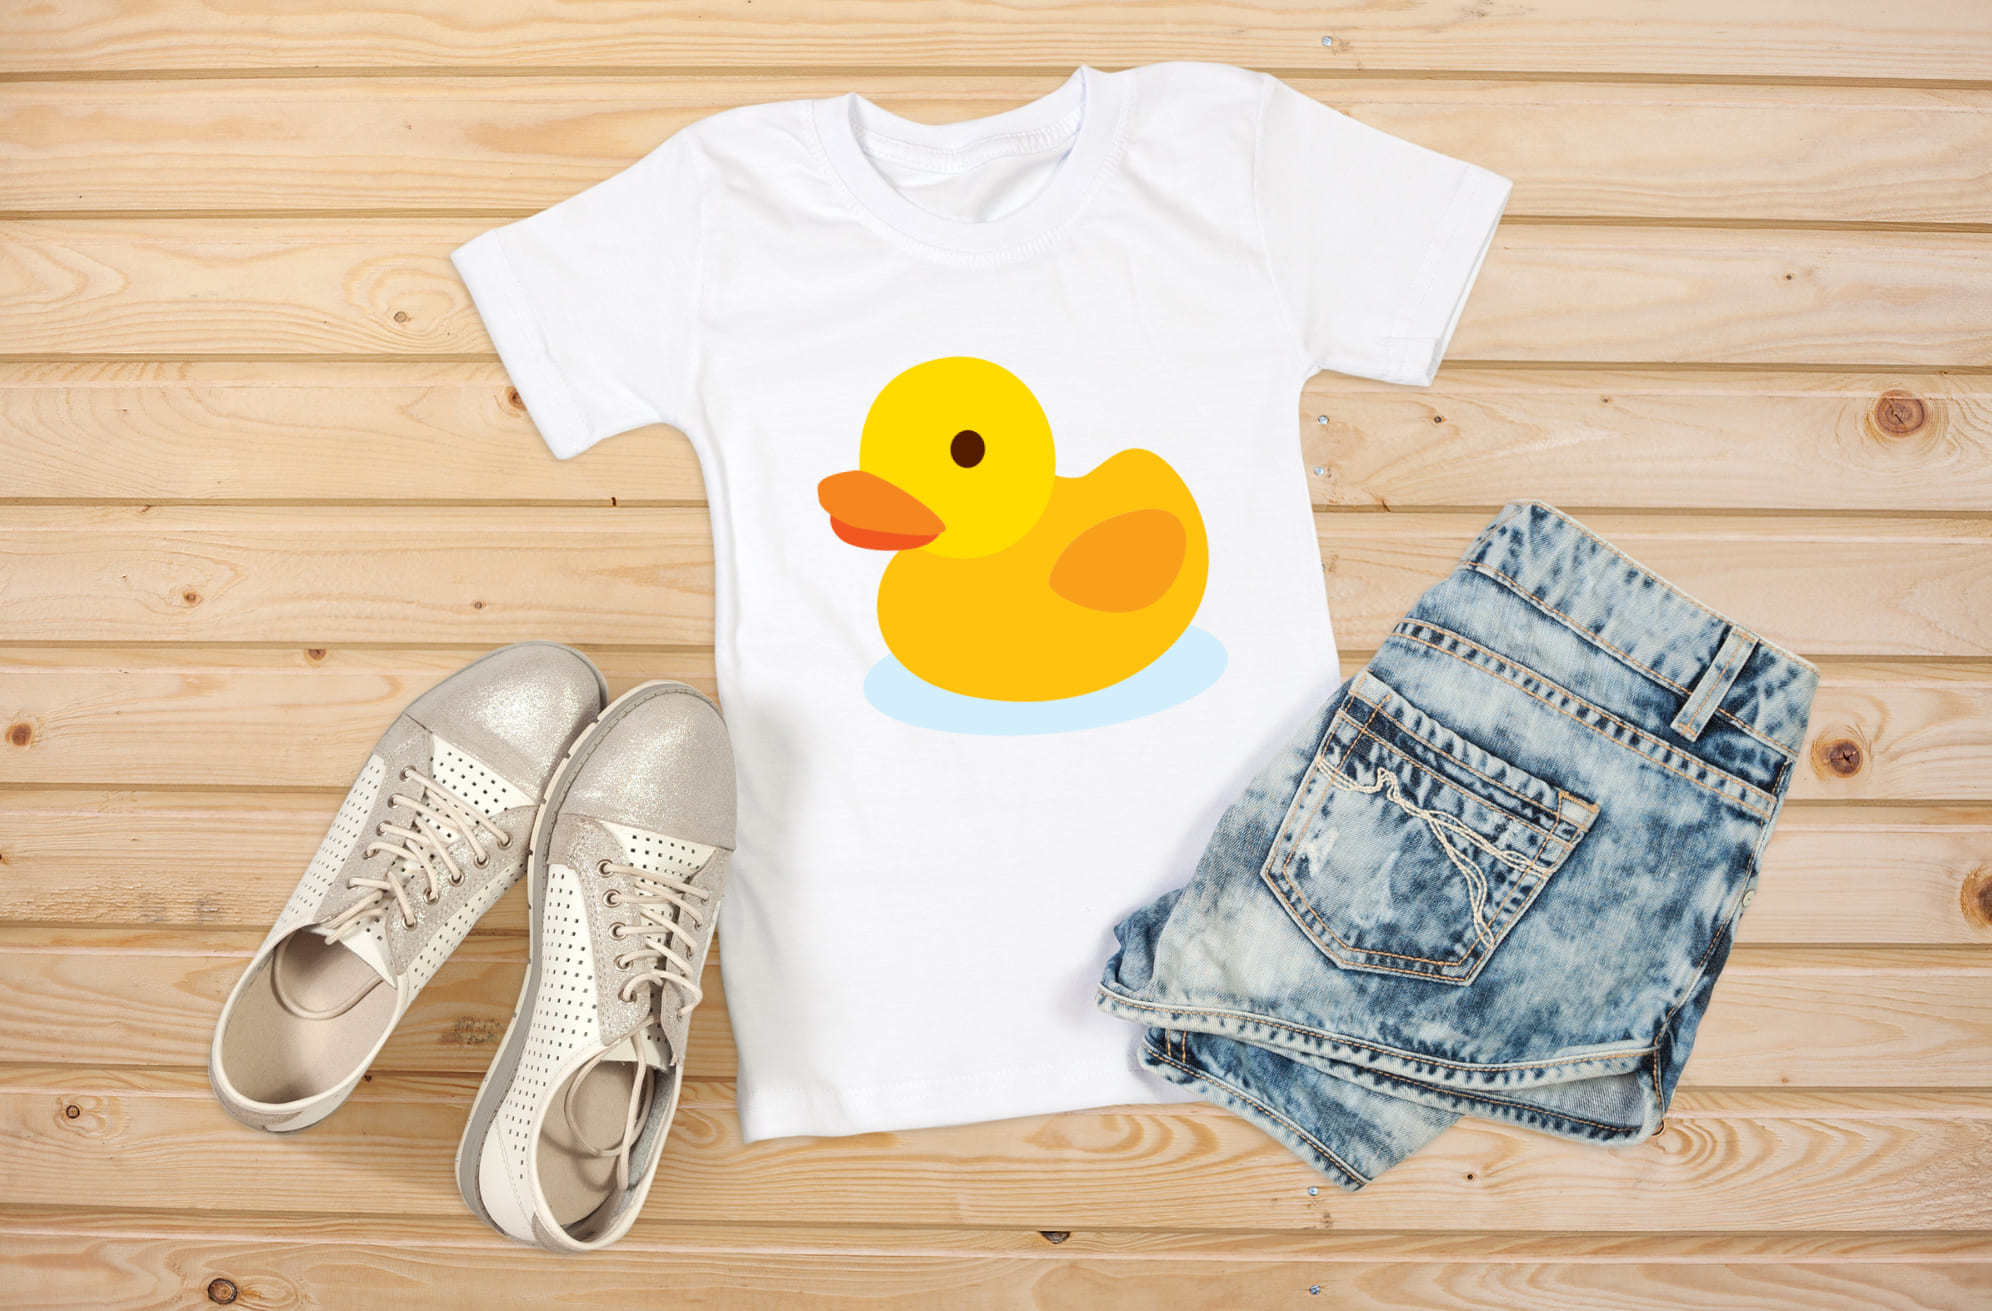 Image of a white t-shirt with an enchanting yellow rubber duck print.